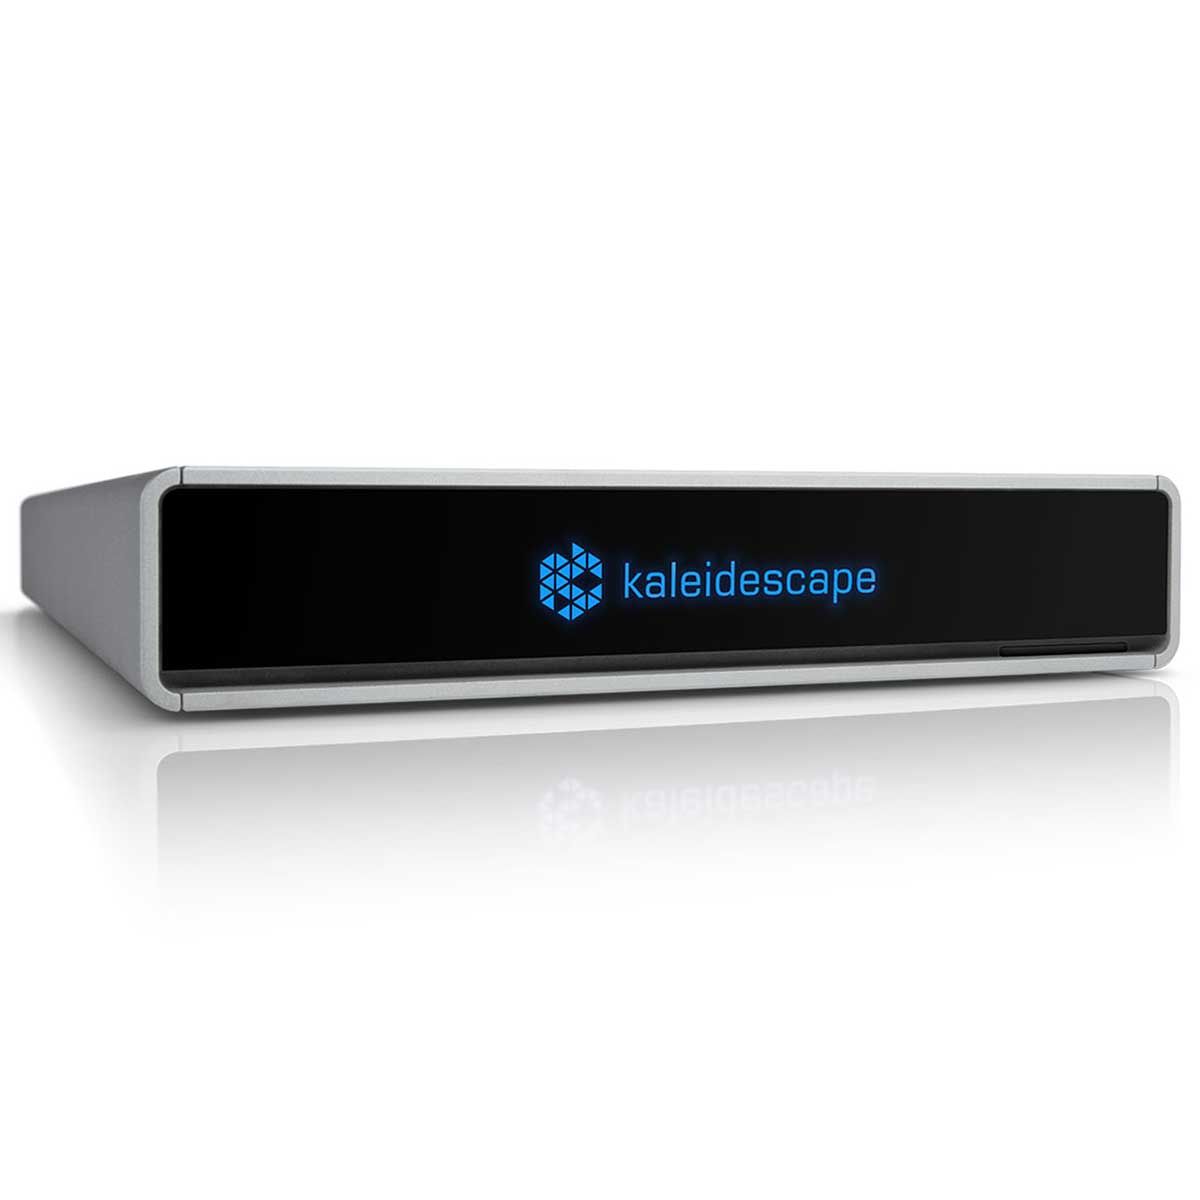 Kaleidescape Strato C 4K UHD Movie Player HDR and Lossless Multichannel Audio | Premium Home Theater Media Player